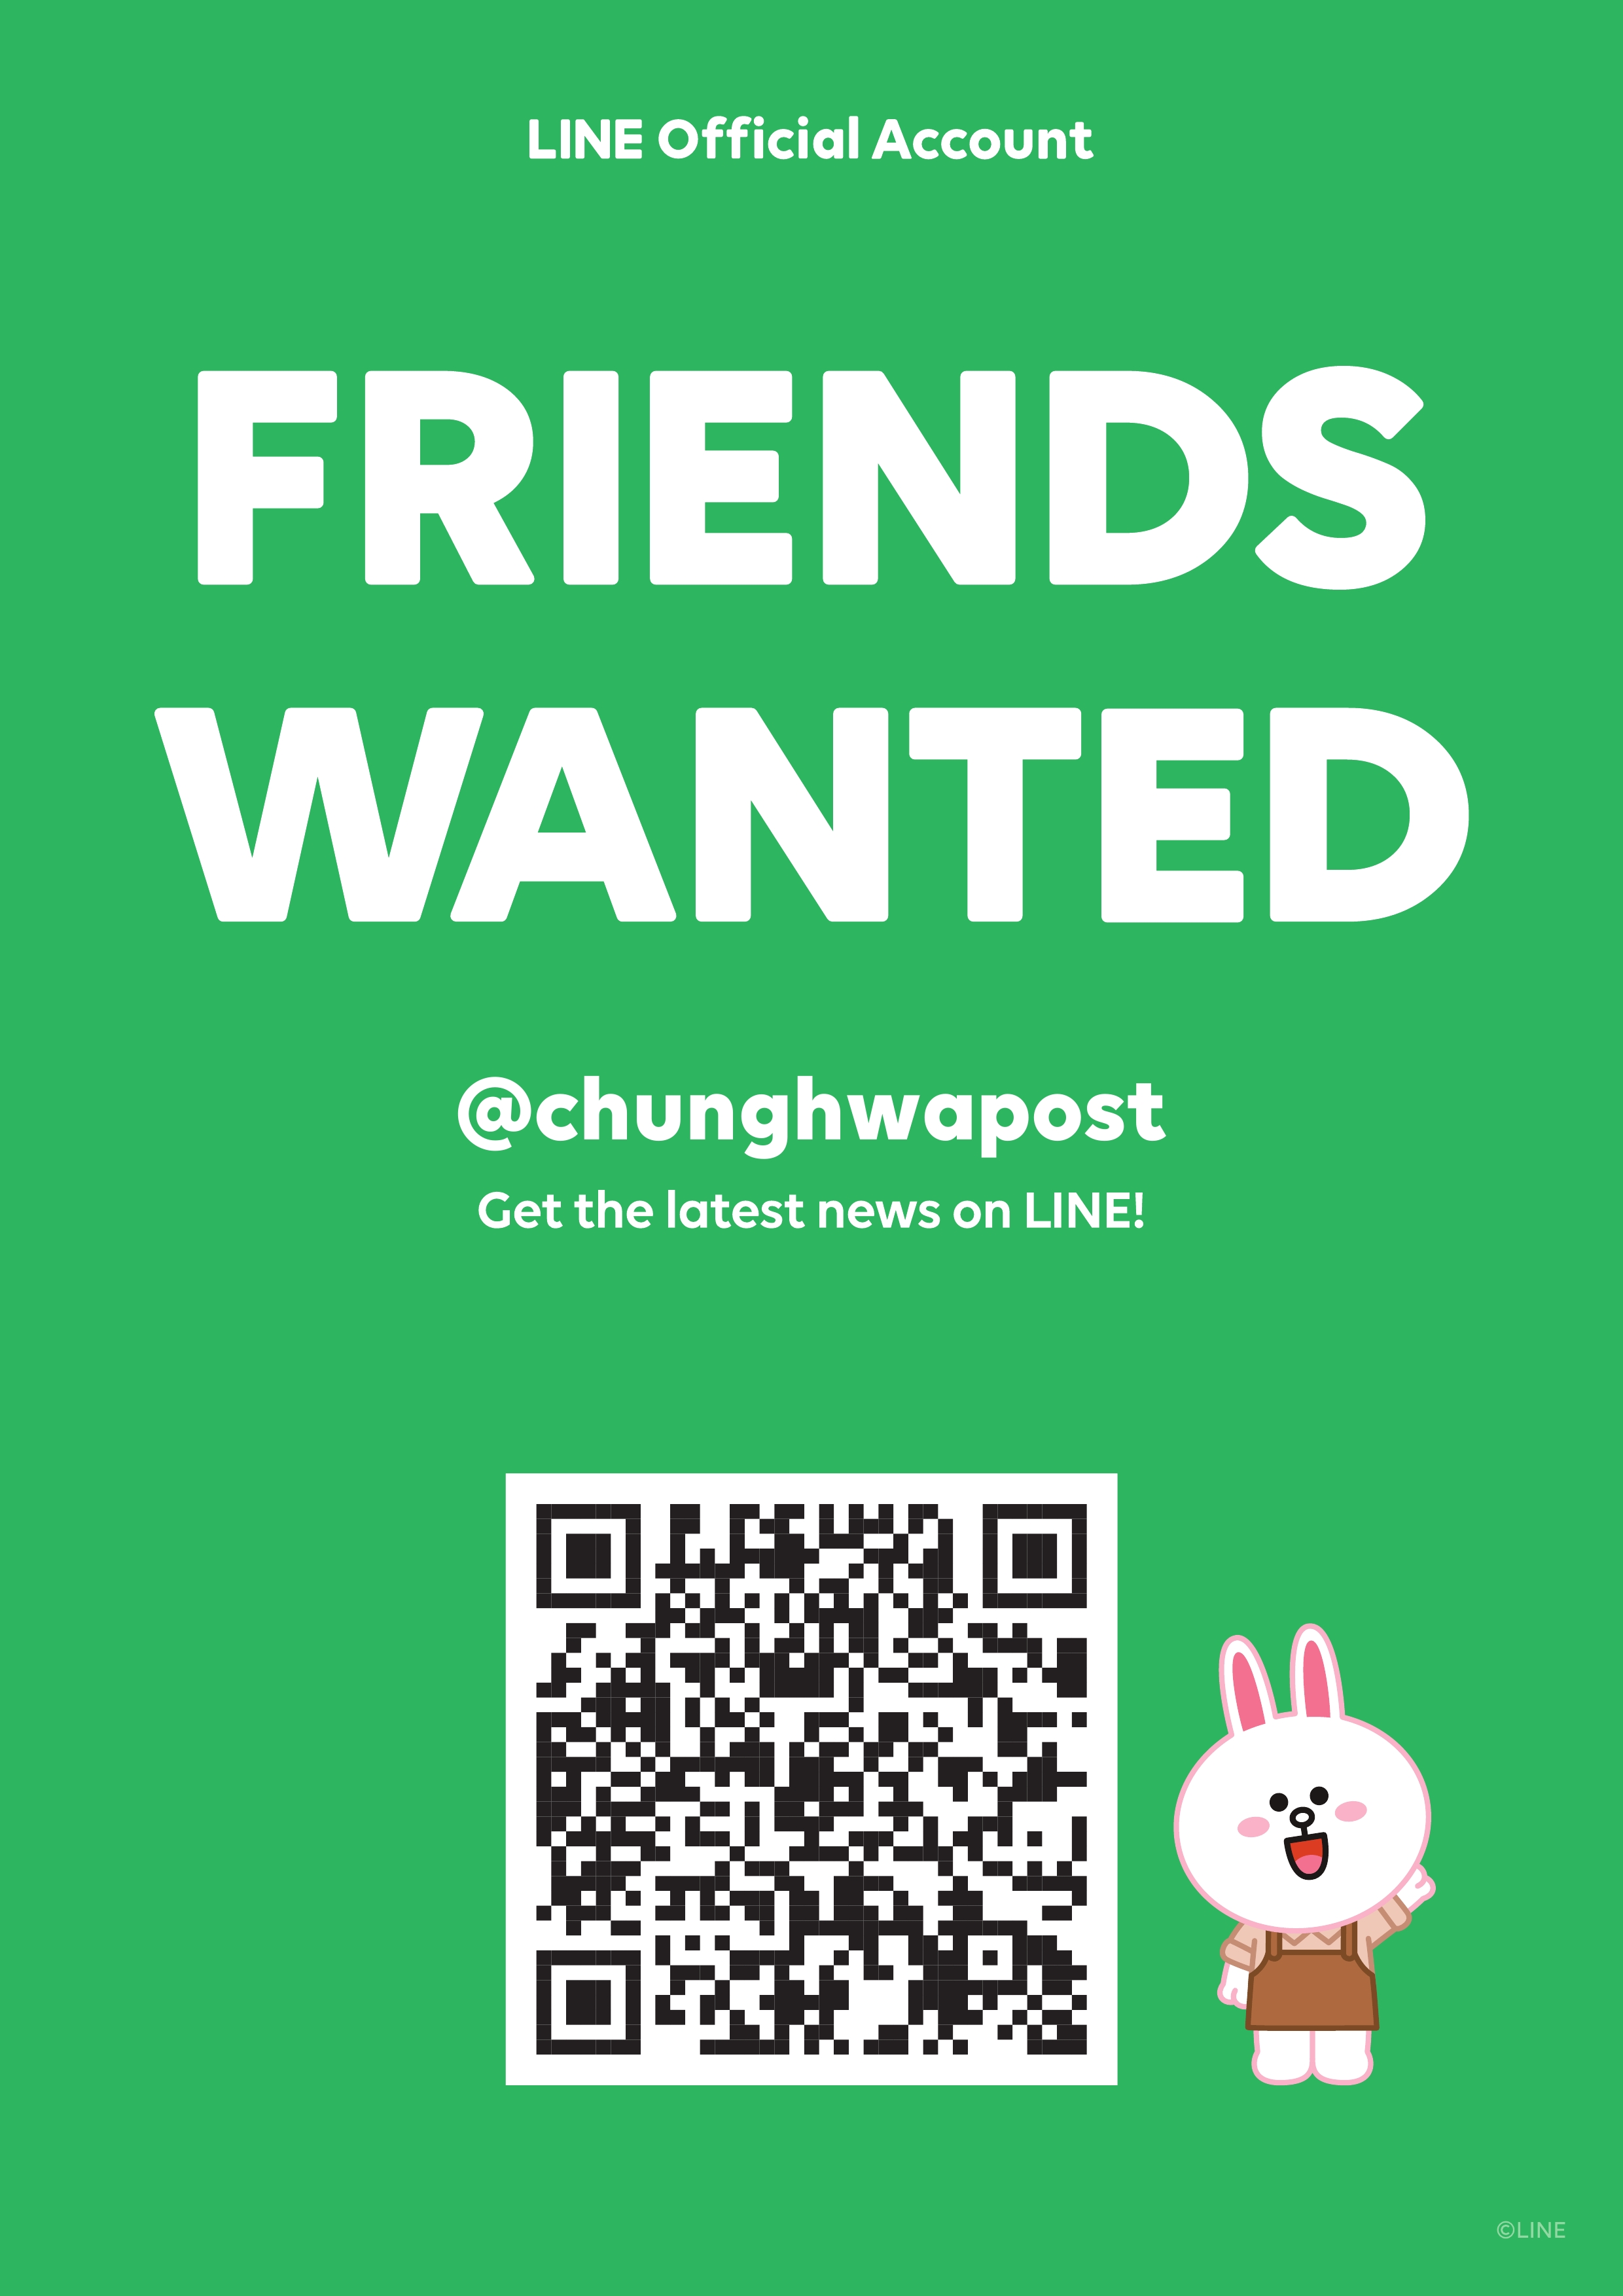 FRIENDS WANTED